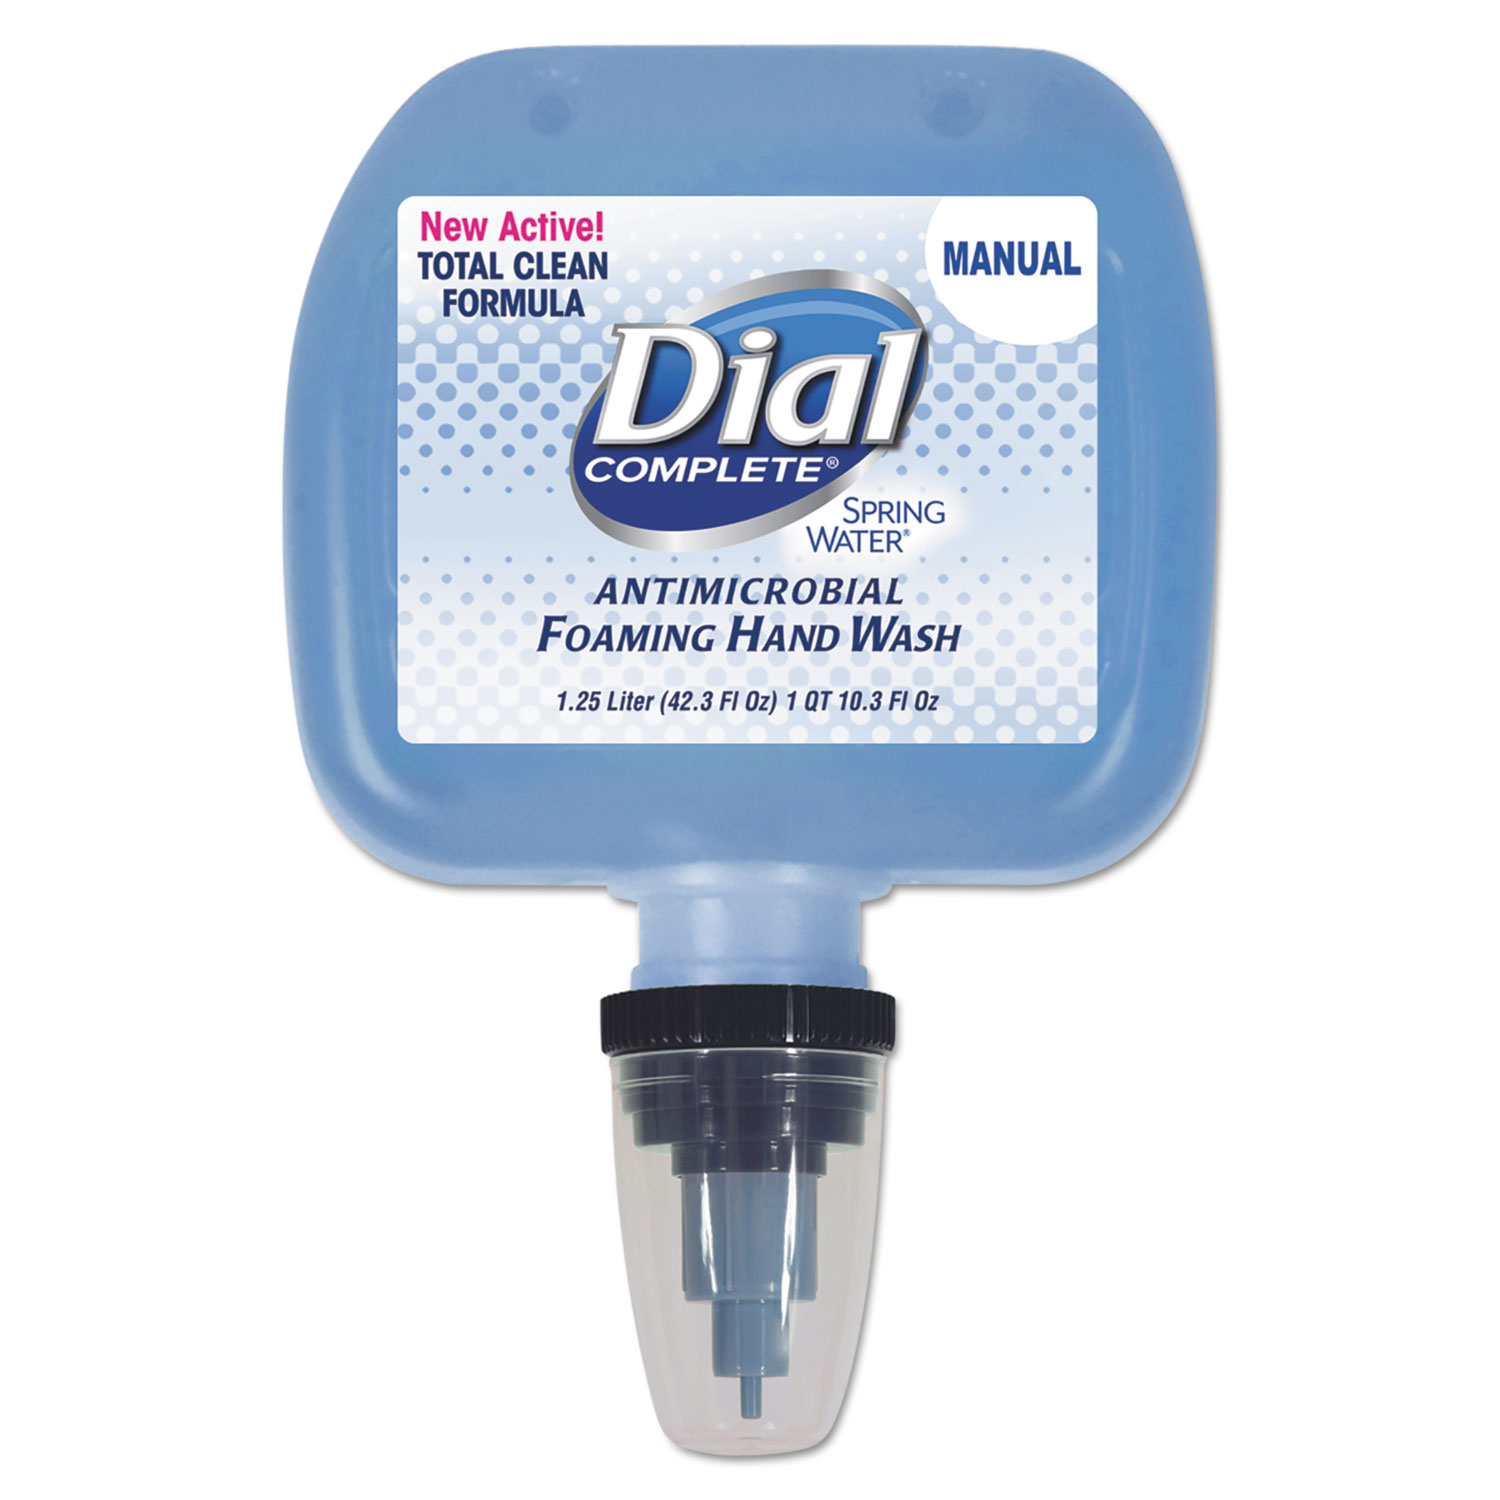  Dial Professional 17000134413 Antimicrobial Foaming Hand Wash, Spring Water Scent, 1.25 L Cartridge, 3/Carton (DIA13441CT) 